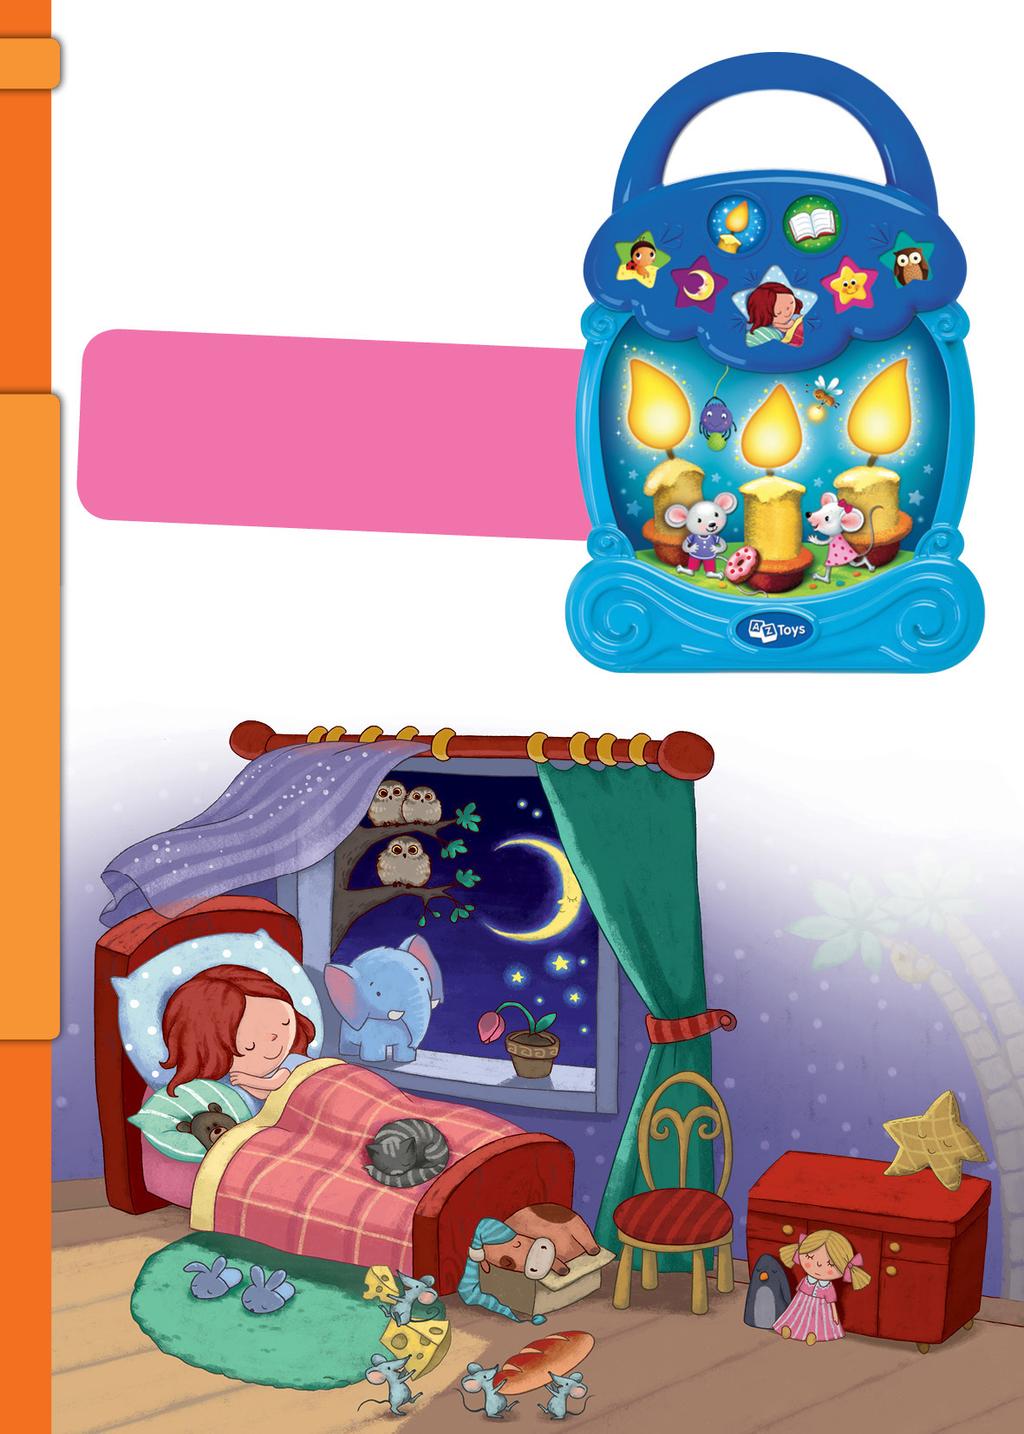 44 FAIRY NIGHTLIGHT SWEET DREAMS REF. AZT-25-A-001 5 famous lullabies 3 popular fairy tales 3 candle lights for you to blow out!